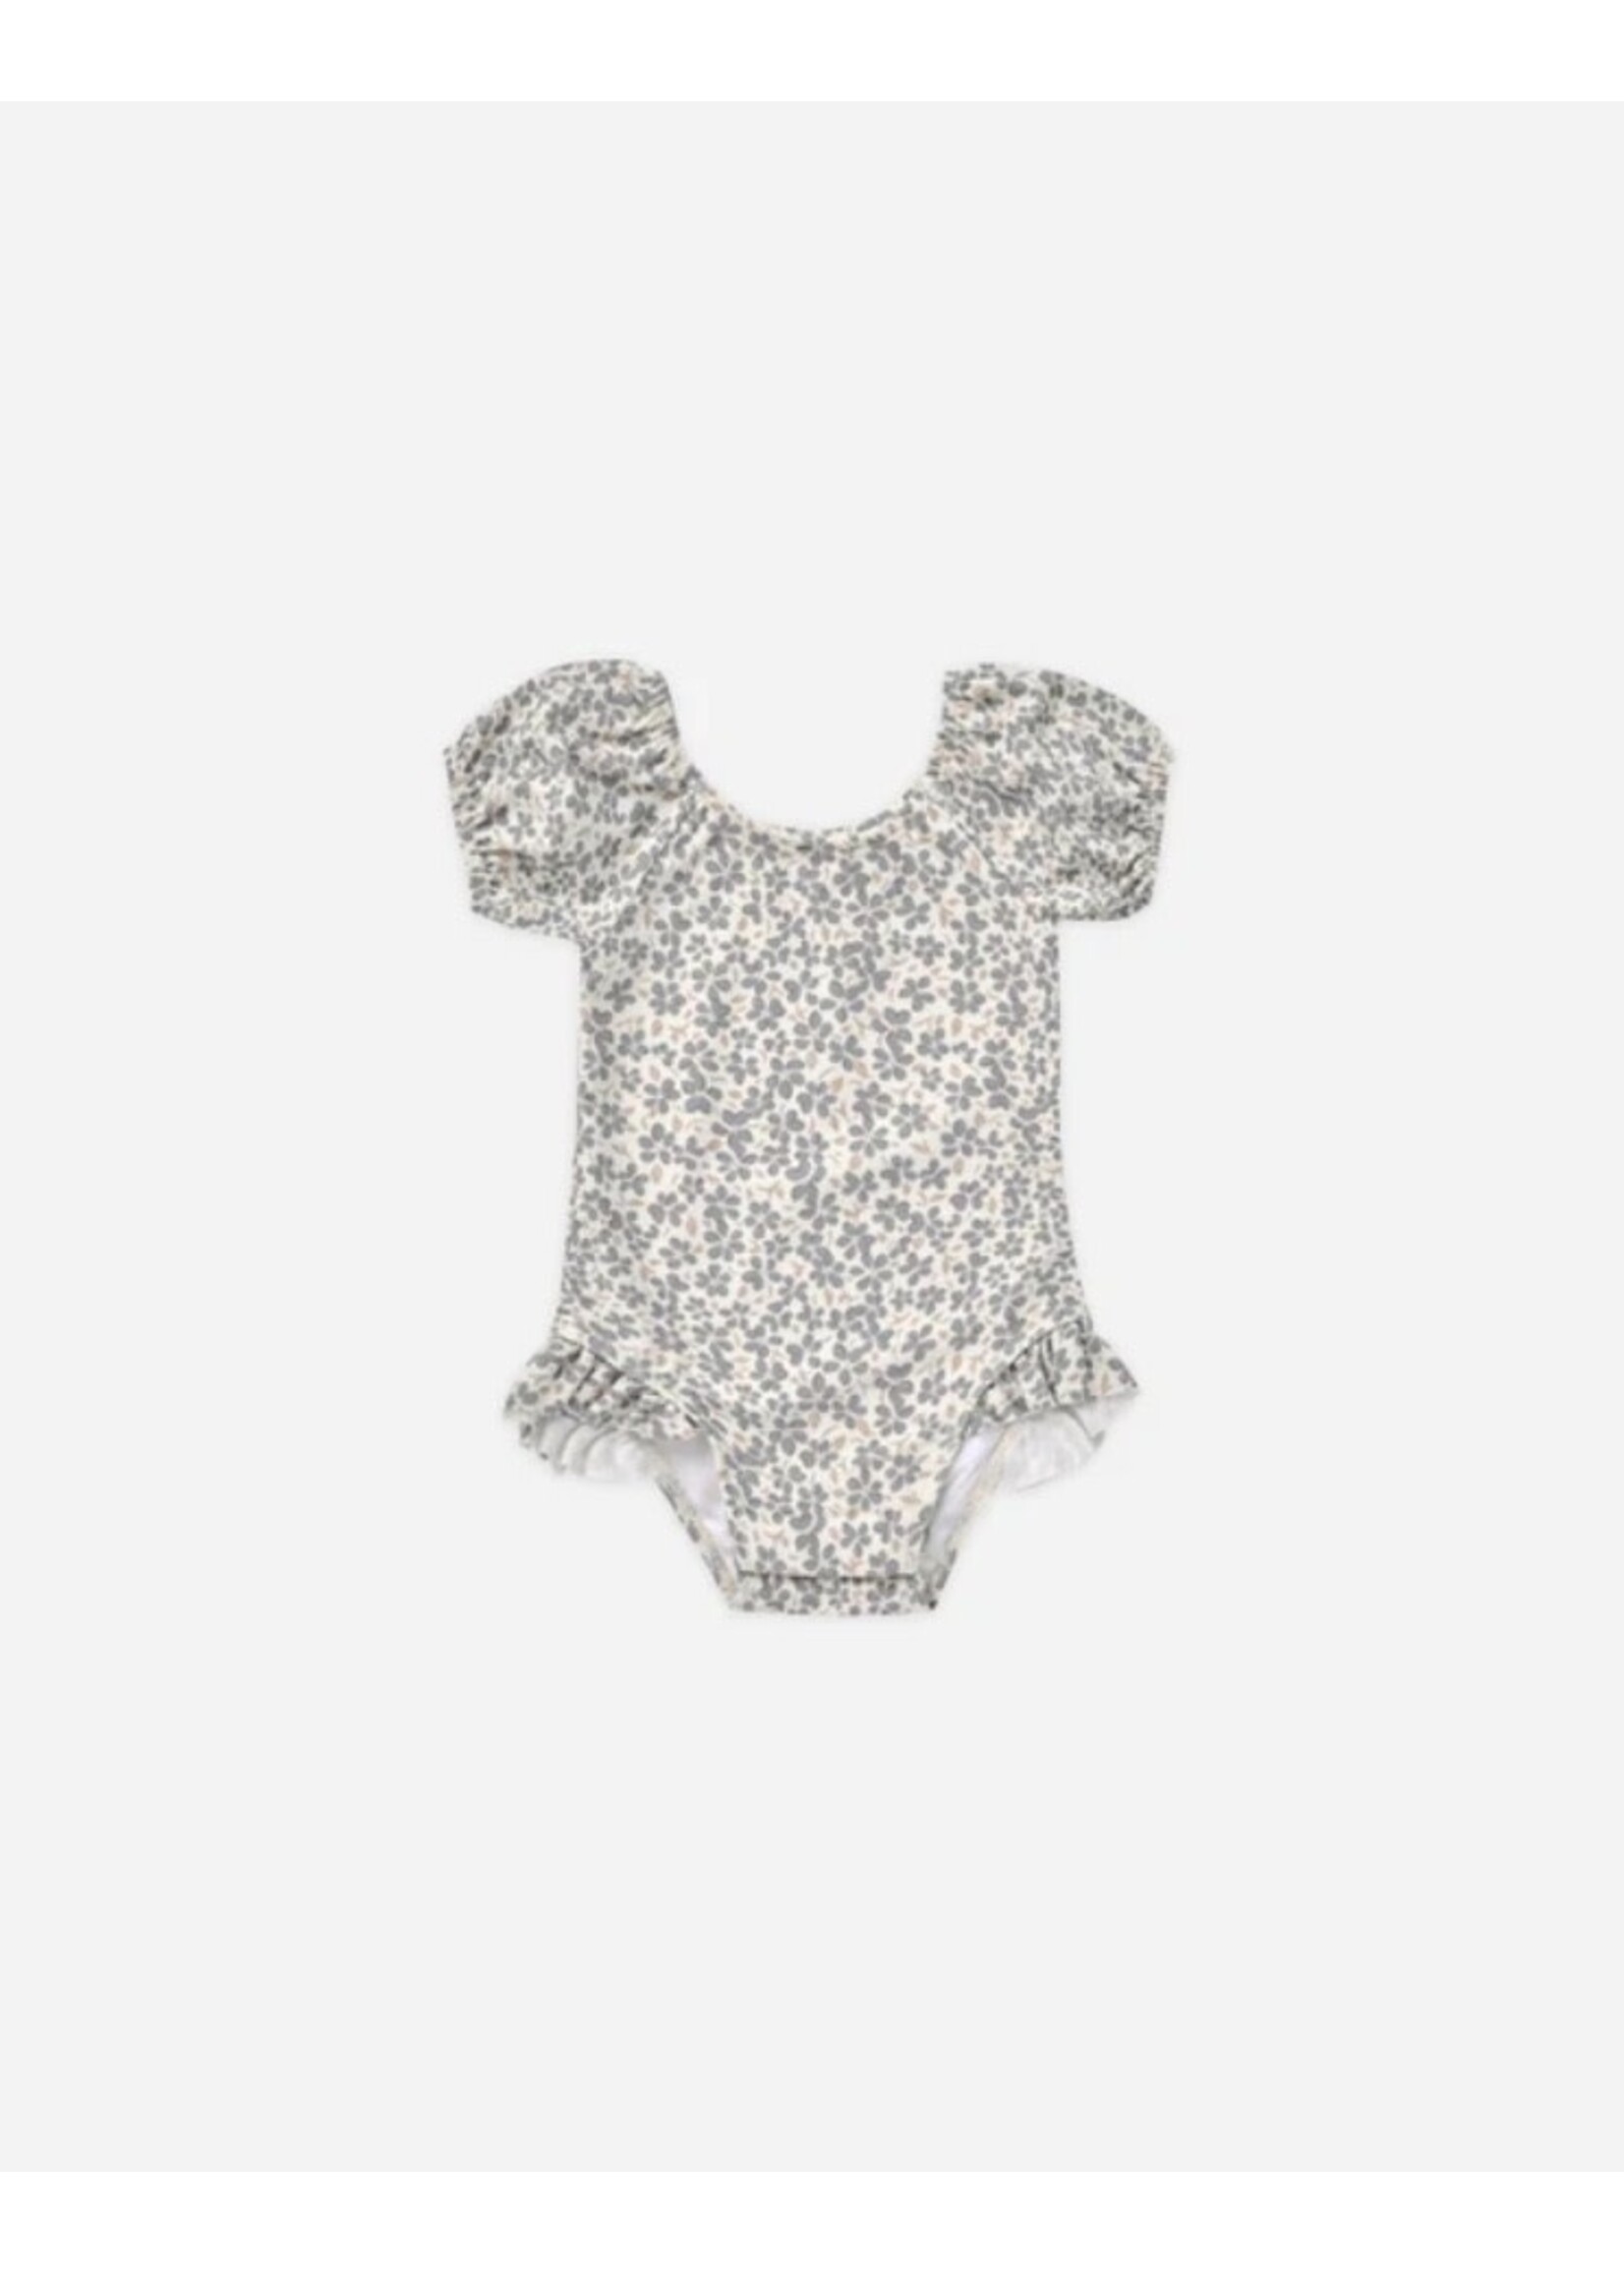 Quincy Mae Quincy Mae, Catalina One-Piece Swimsuit || Poppy